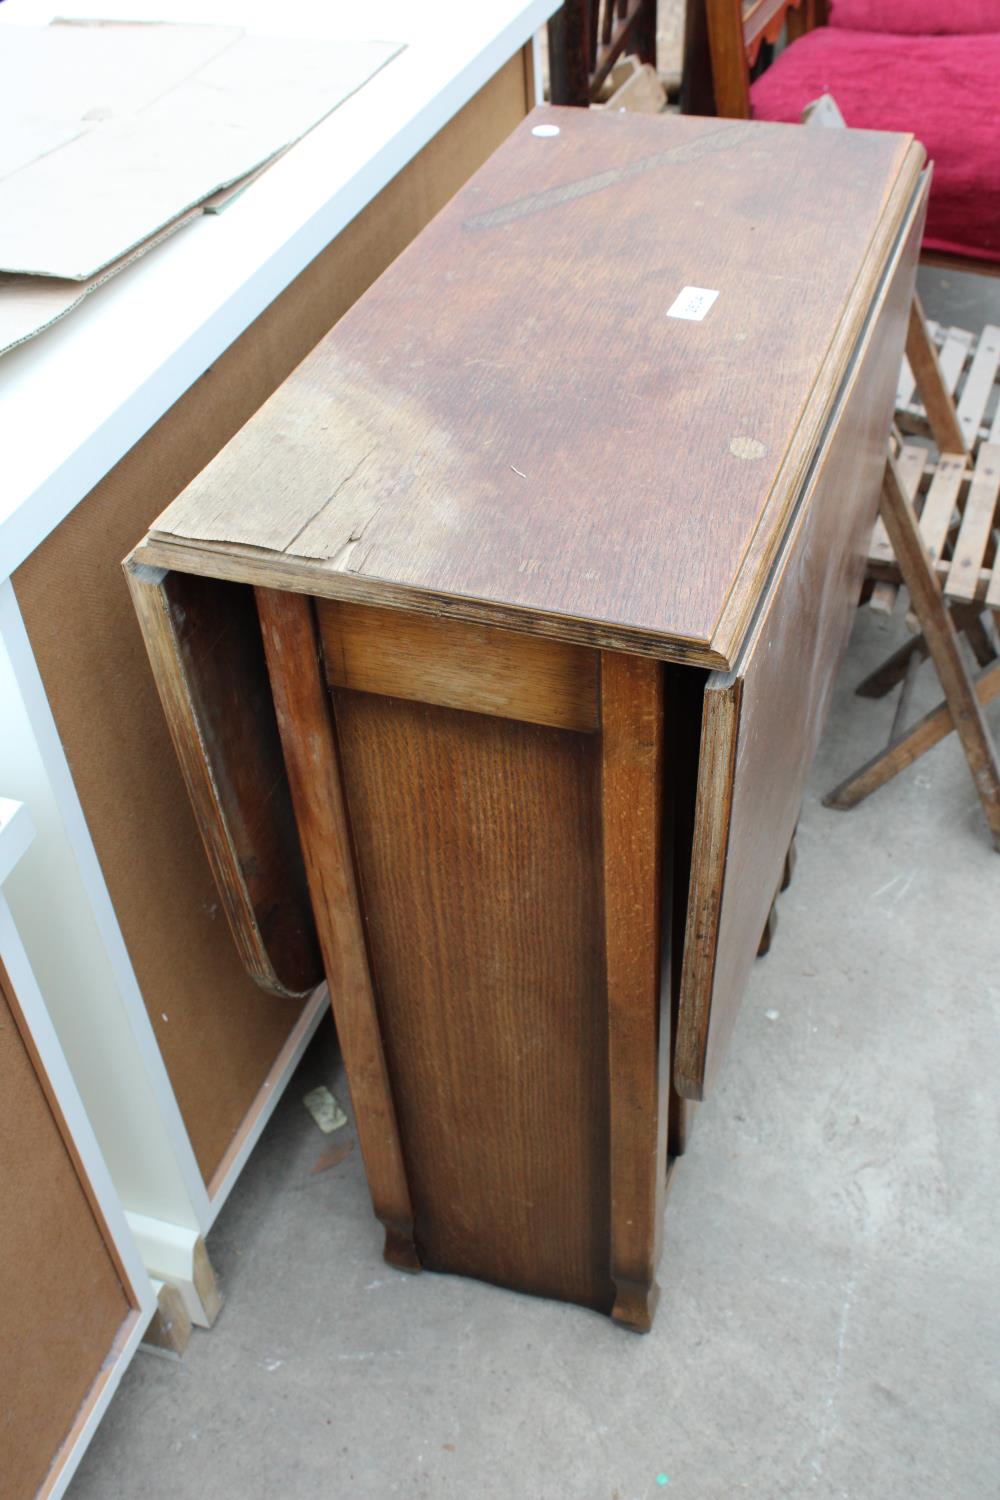 A MID 20TH CENTURY OAK DROP-LEAF TABLE - Image 2 of 2